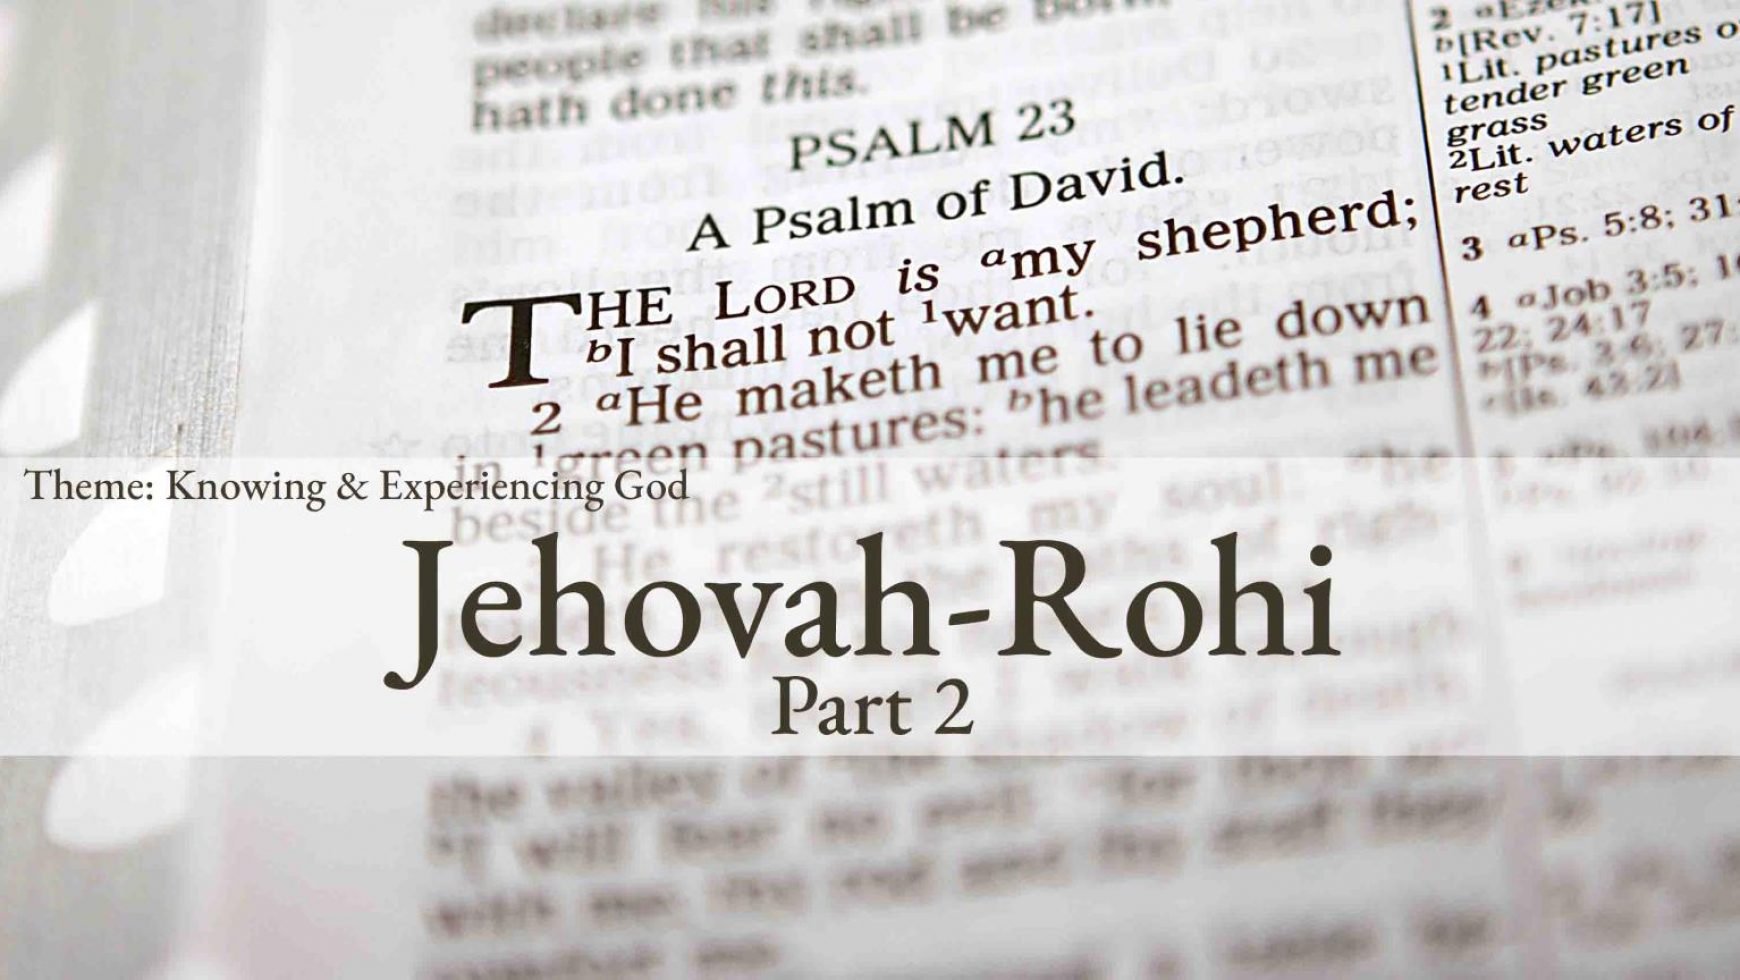 Jehovah-Rohi (Part 2)